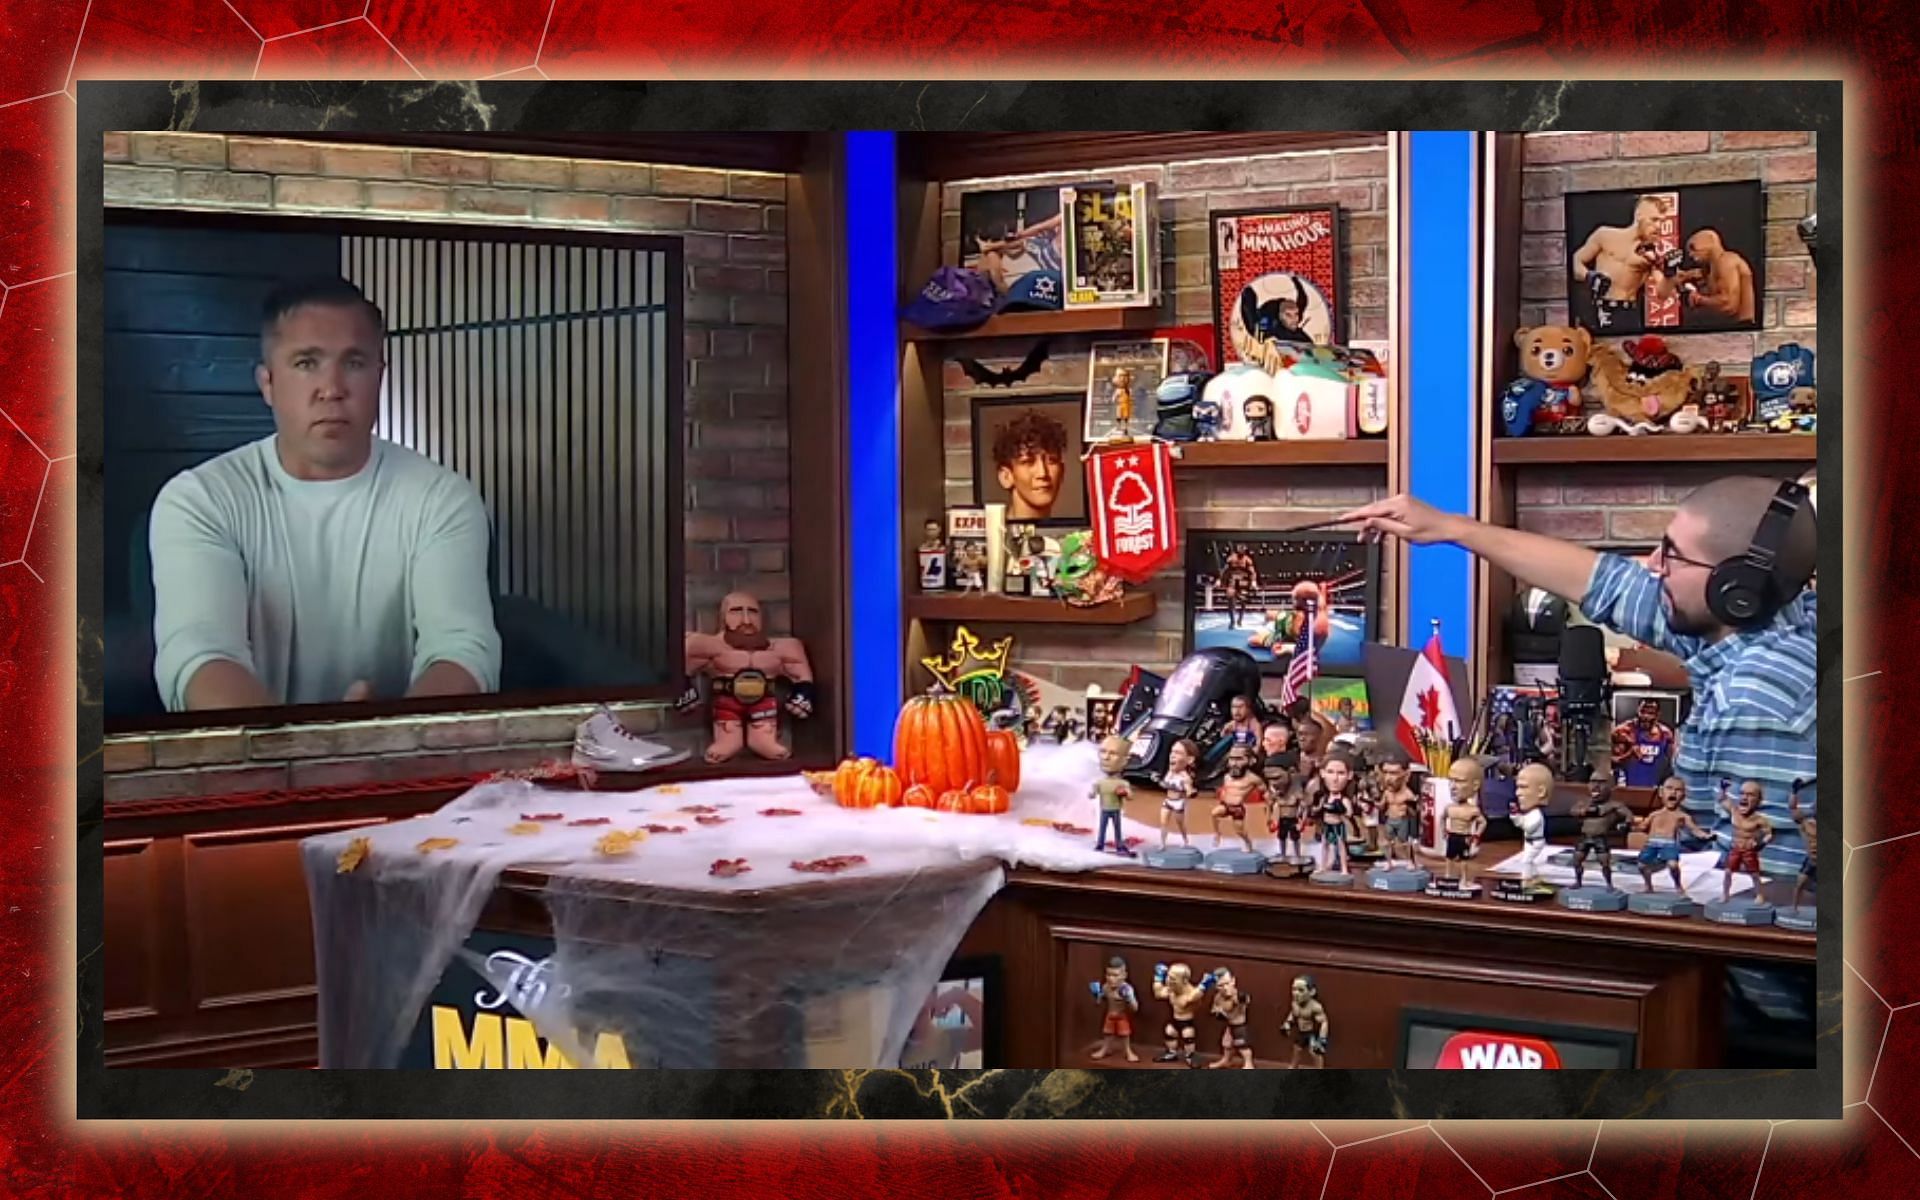 Chael Sonnen and Ariel Helwani had a banter on The MMA Hour